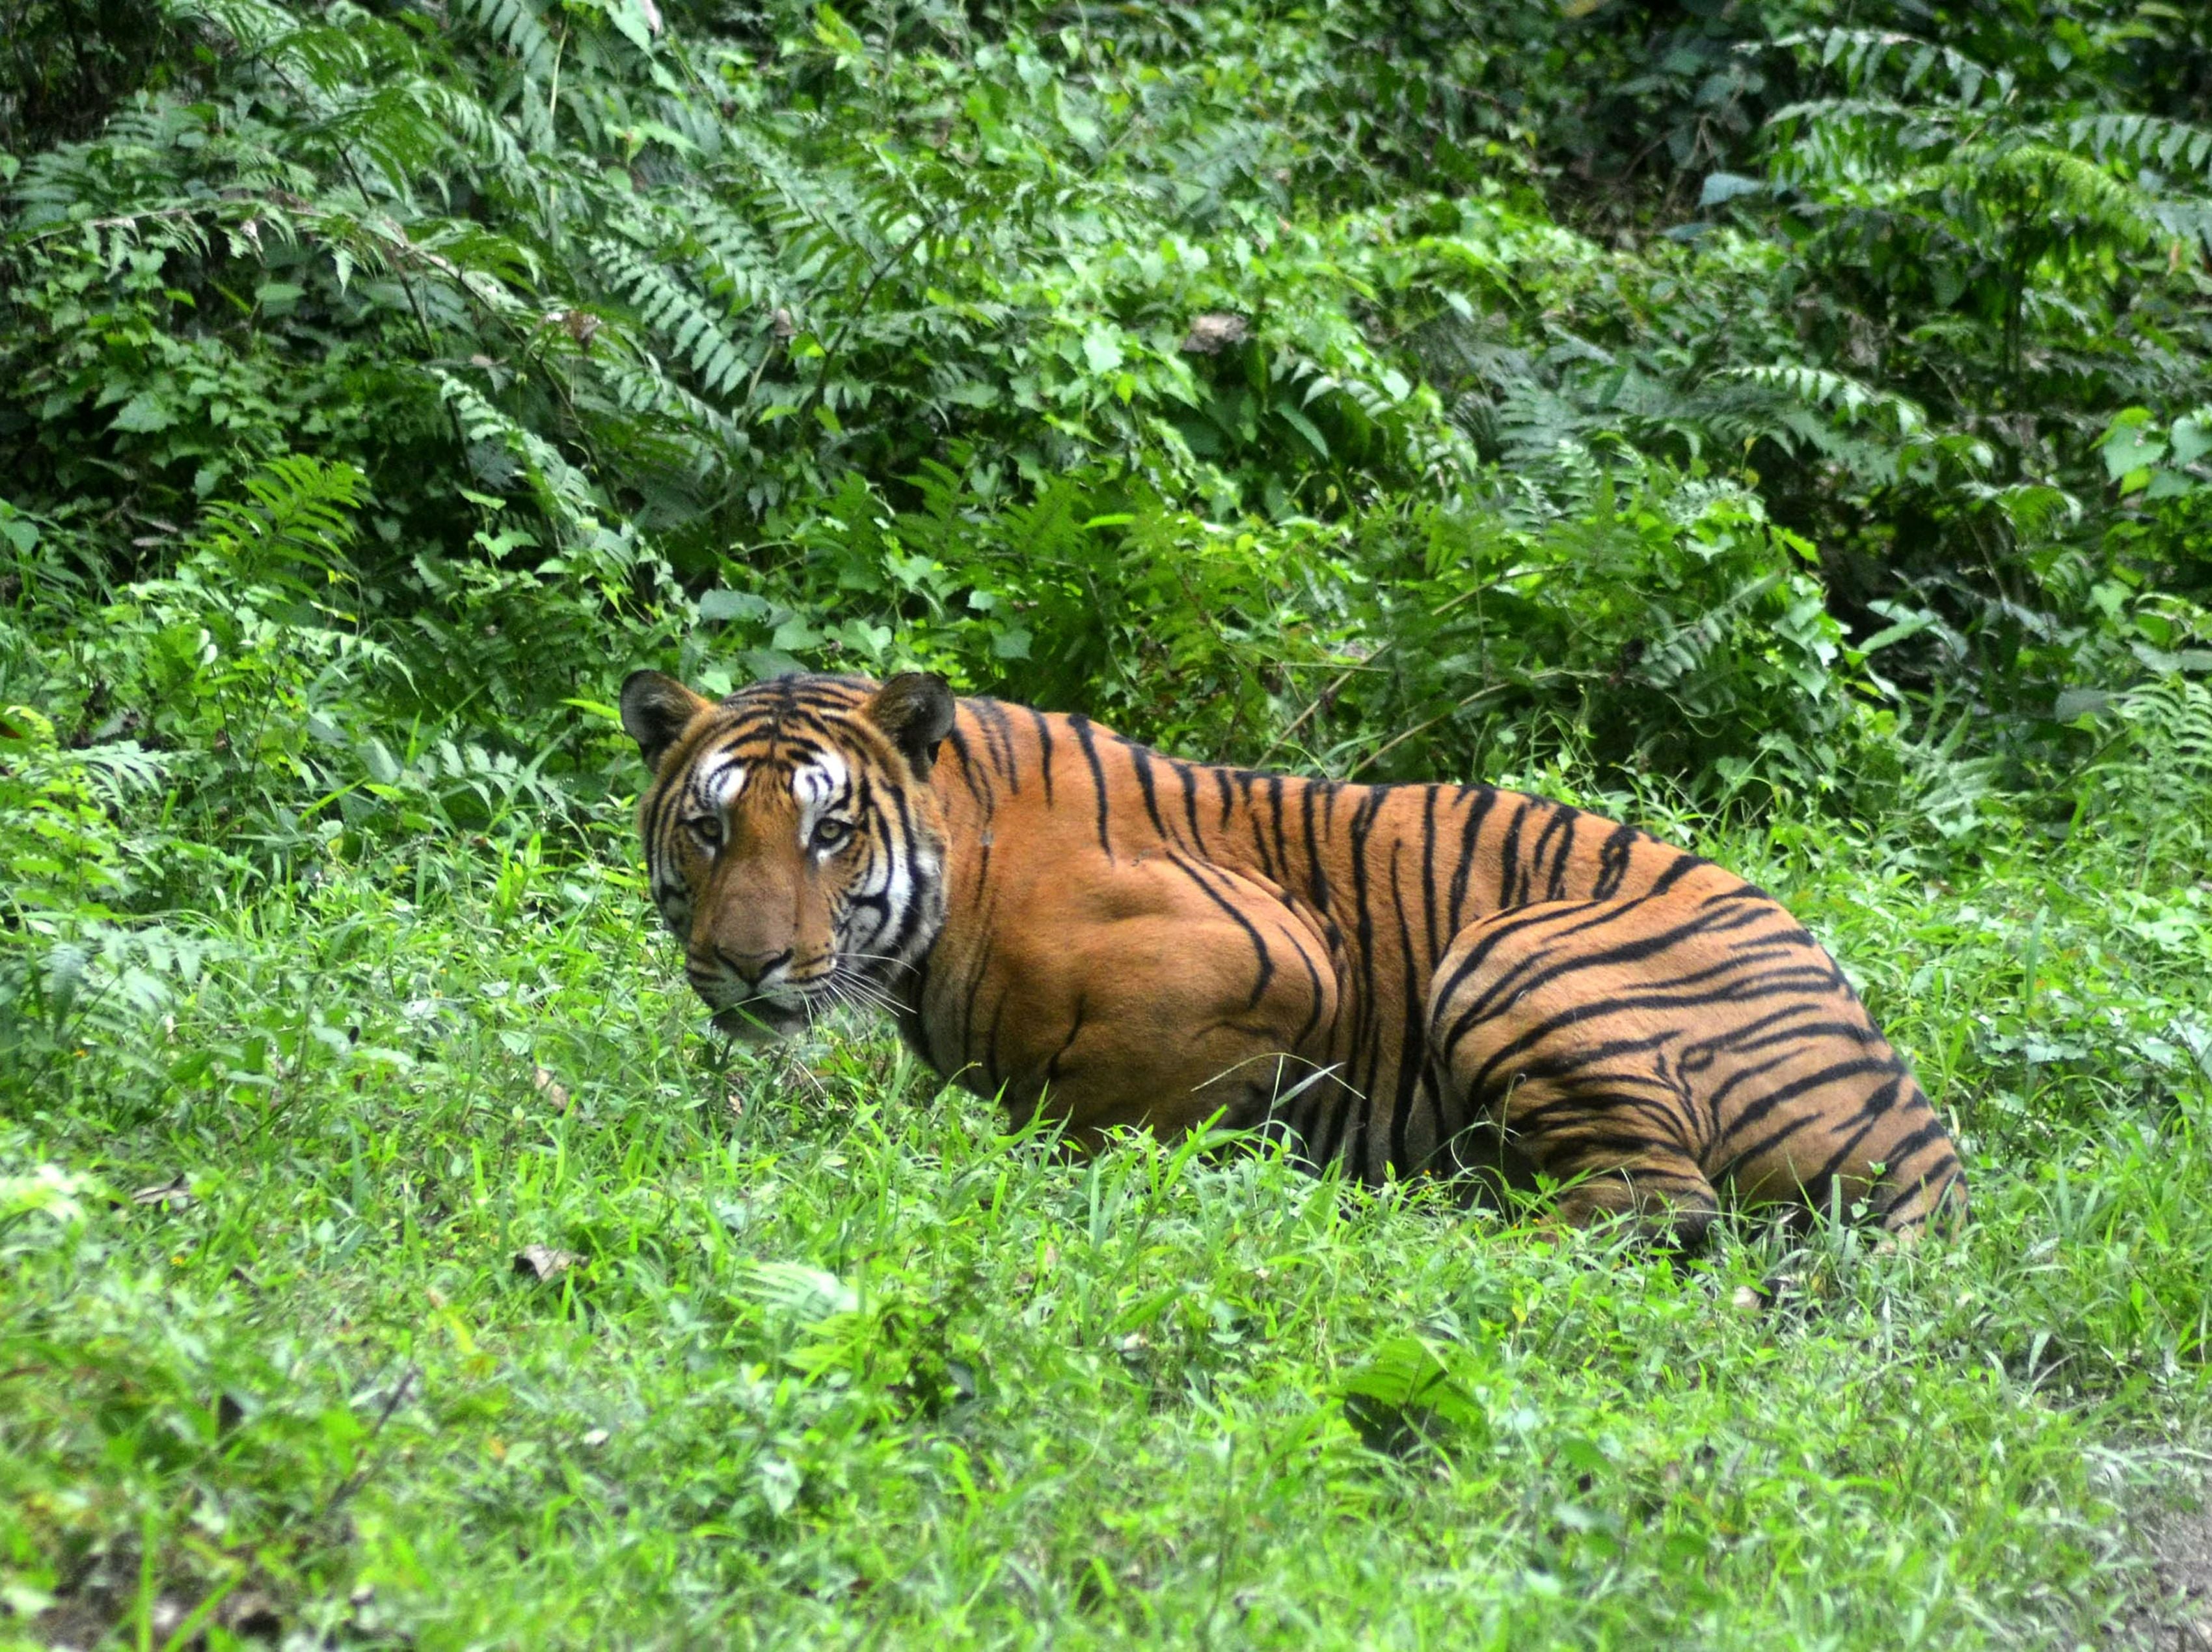 File photo: A Royal Bengal Tiger walks through a jungle clearing in Kaziranga National Park, some 280kms east of Guwahati, India, 21 December 2014